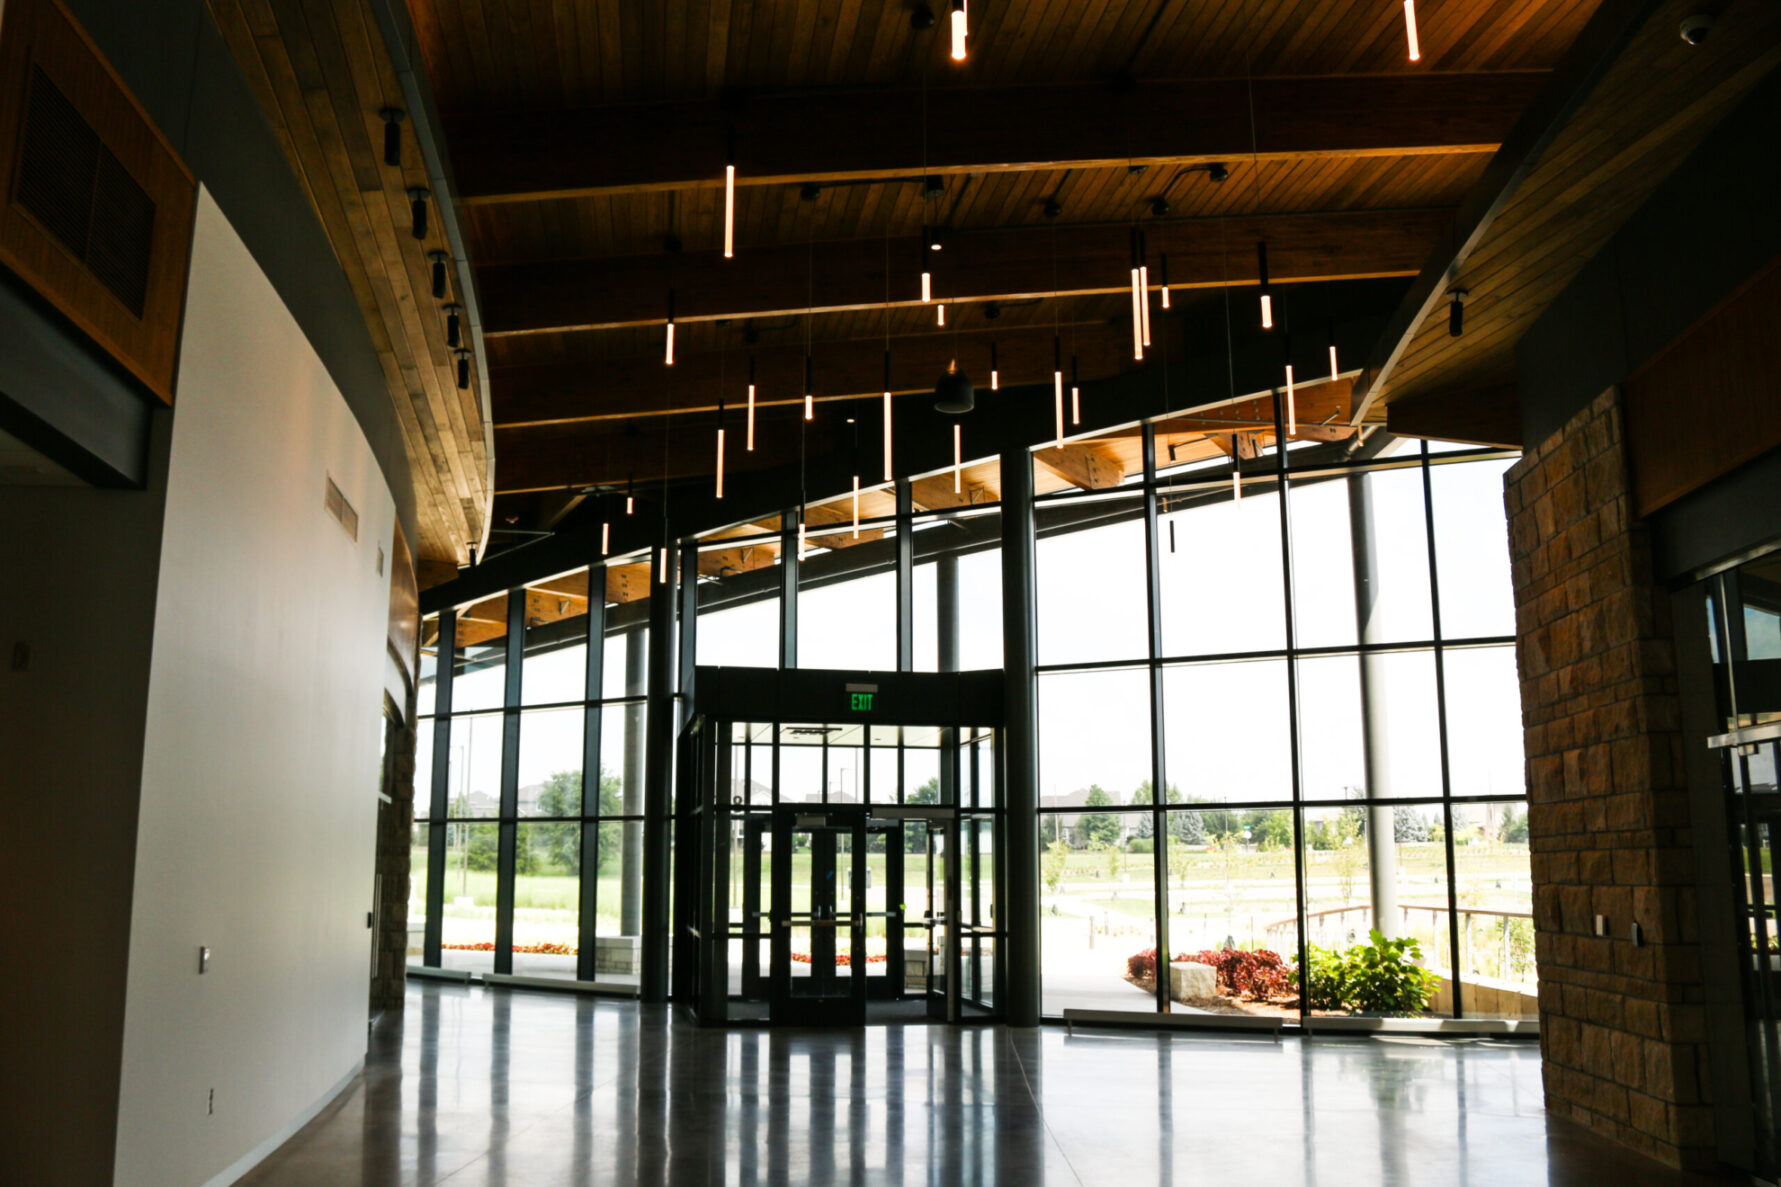 LongHouse Visitor Center at the Overland Park Arboretum